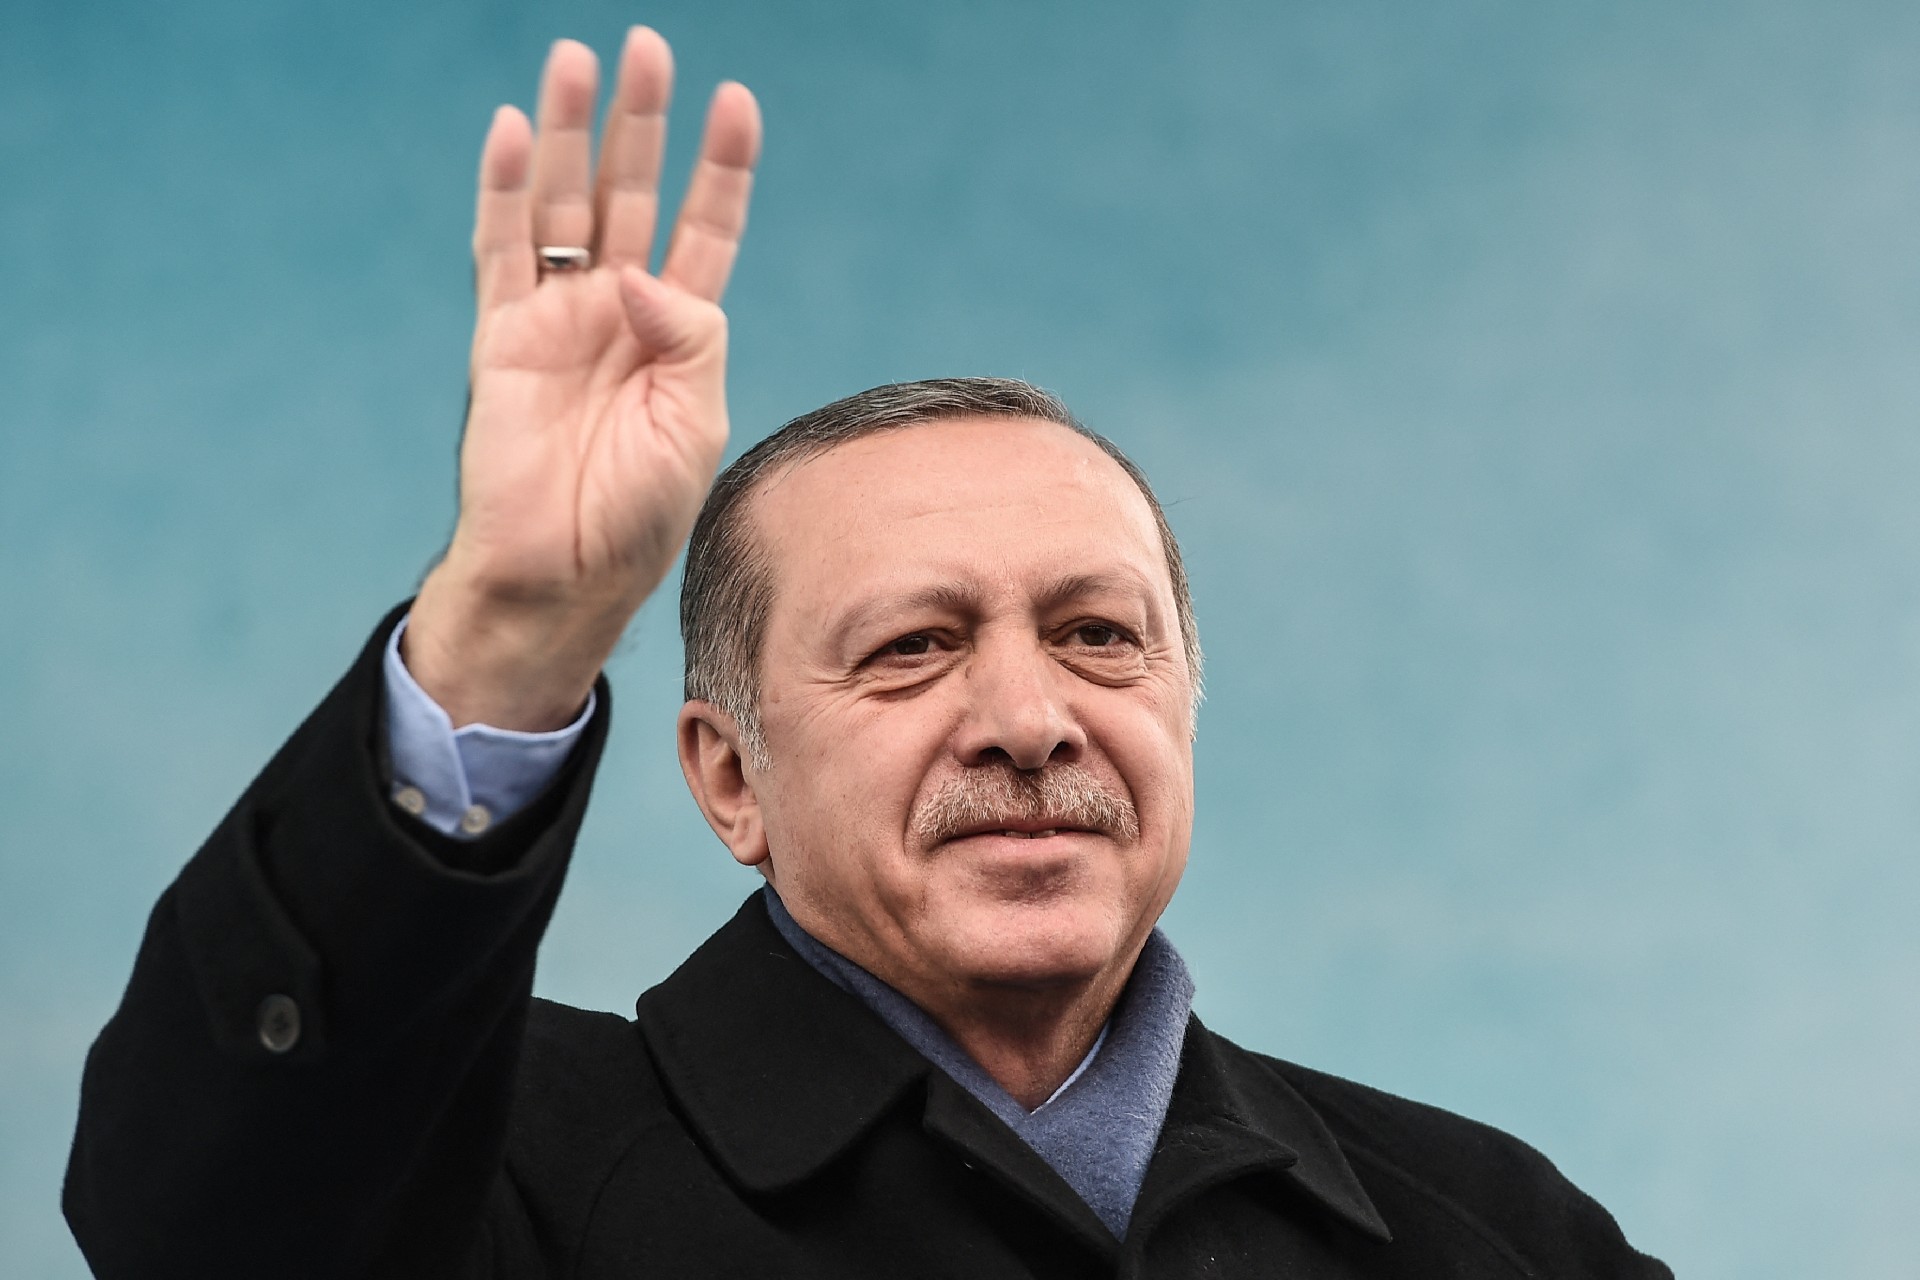 Erdogan greets supporters with the four-finger "Rabaa sign" as he arrives to a rally in Istanbul on 11 March, 2017 (AFP)